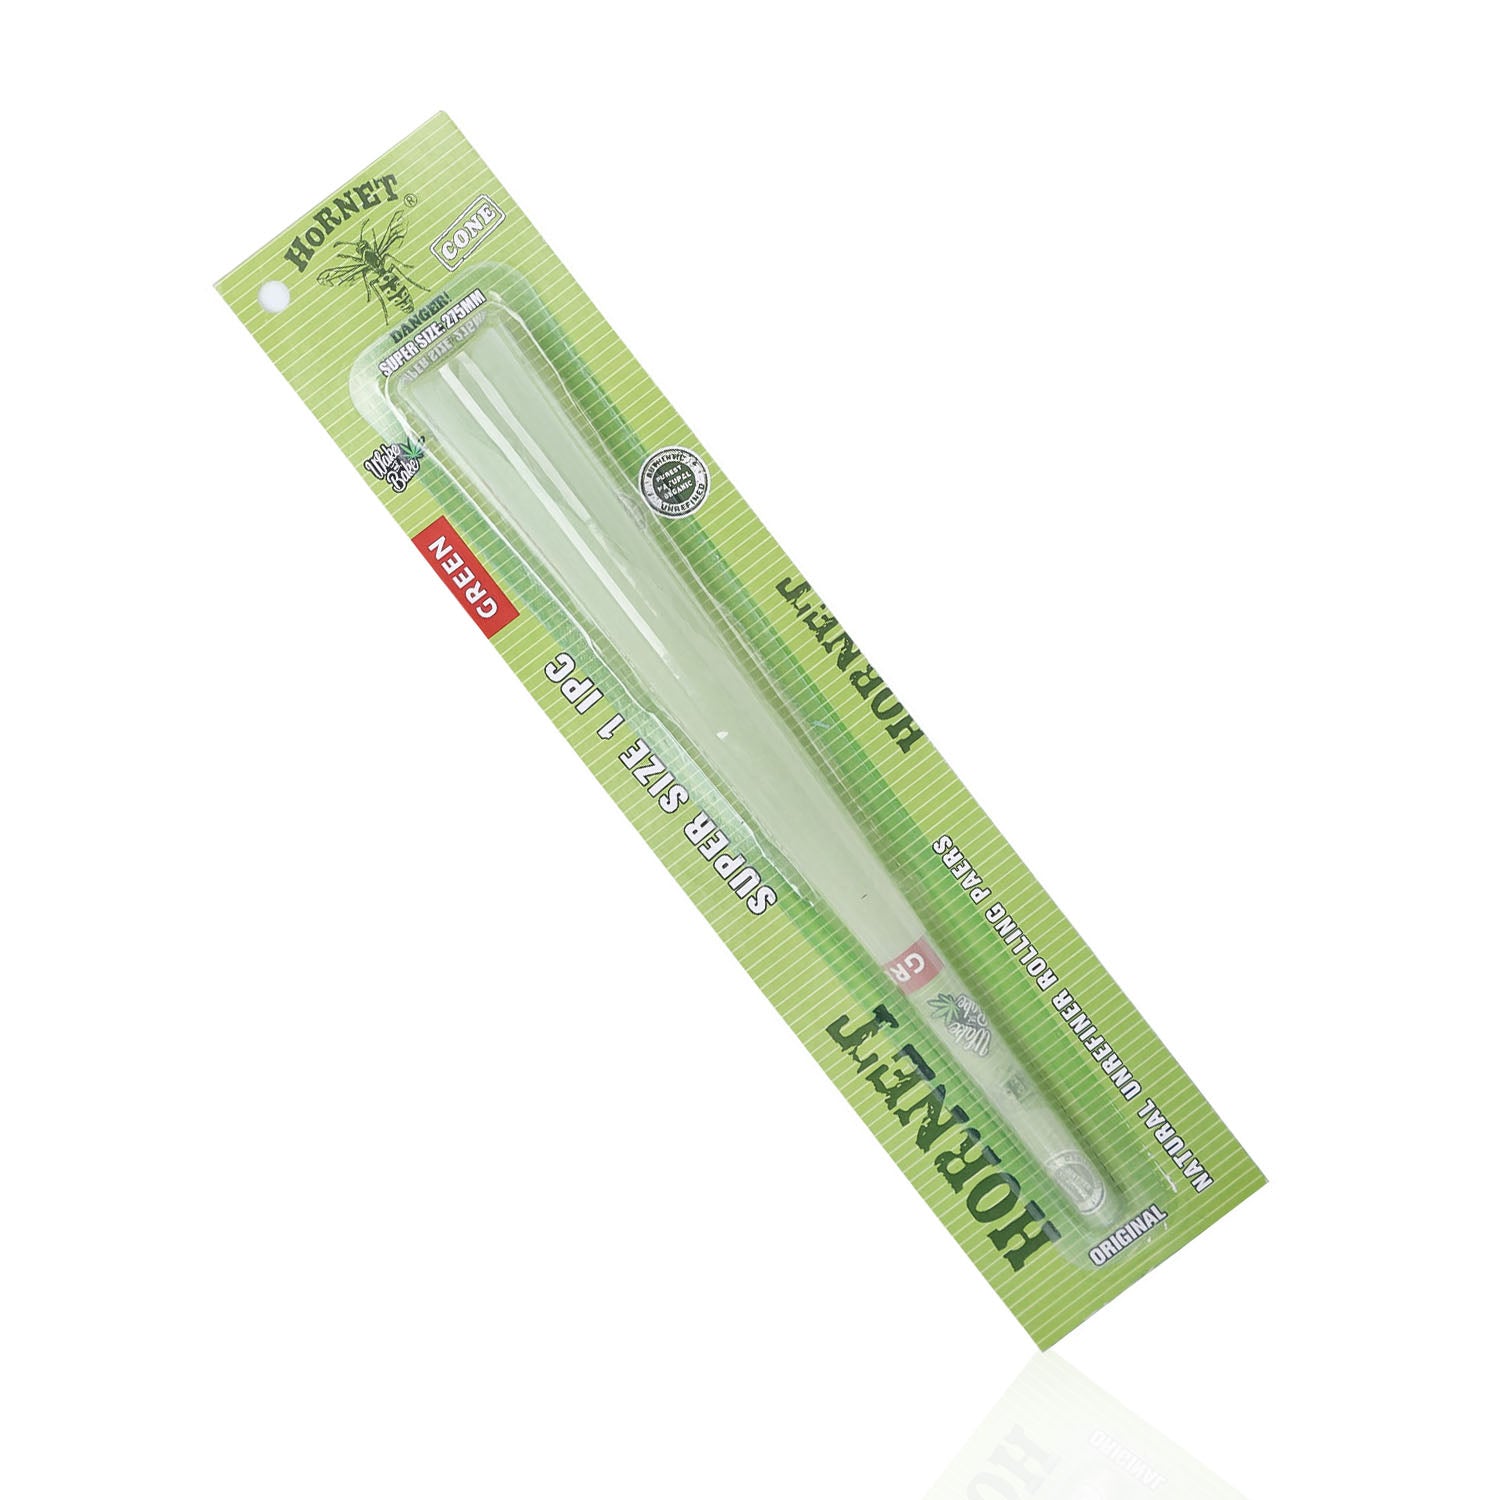 HORNET Super Size Pre Rolled Cones, Natural Rolling Cones, Slow Burning Pre Rolled Rolling Paper, 1 PCS